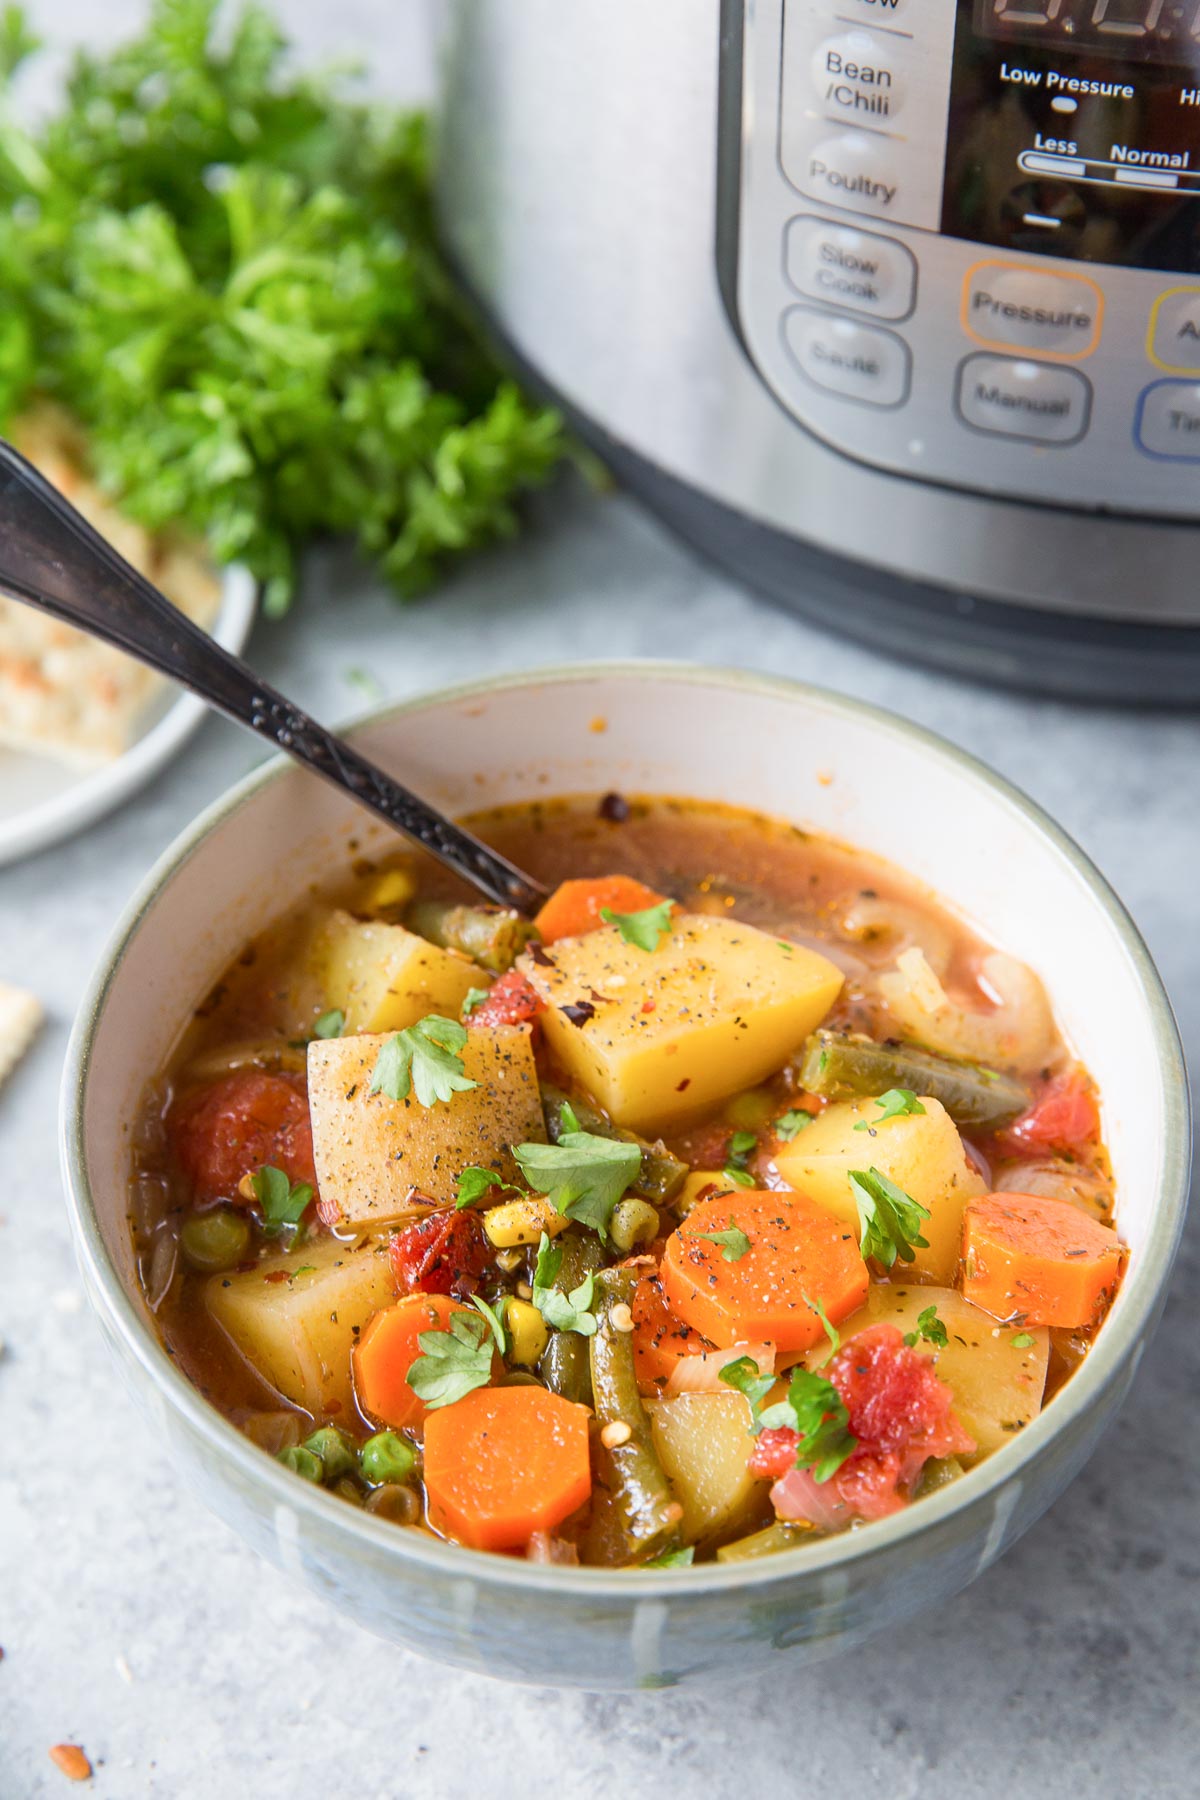 Instant Pot vegetable soup in bowl with a spoon.